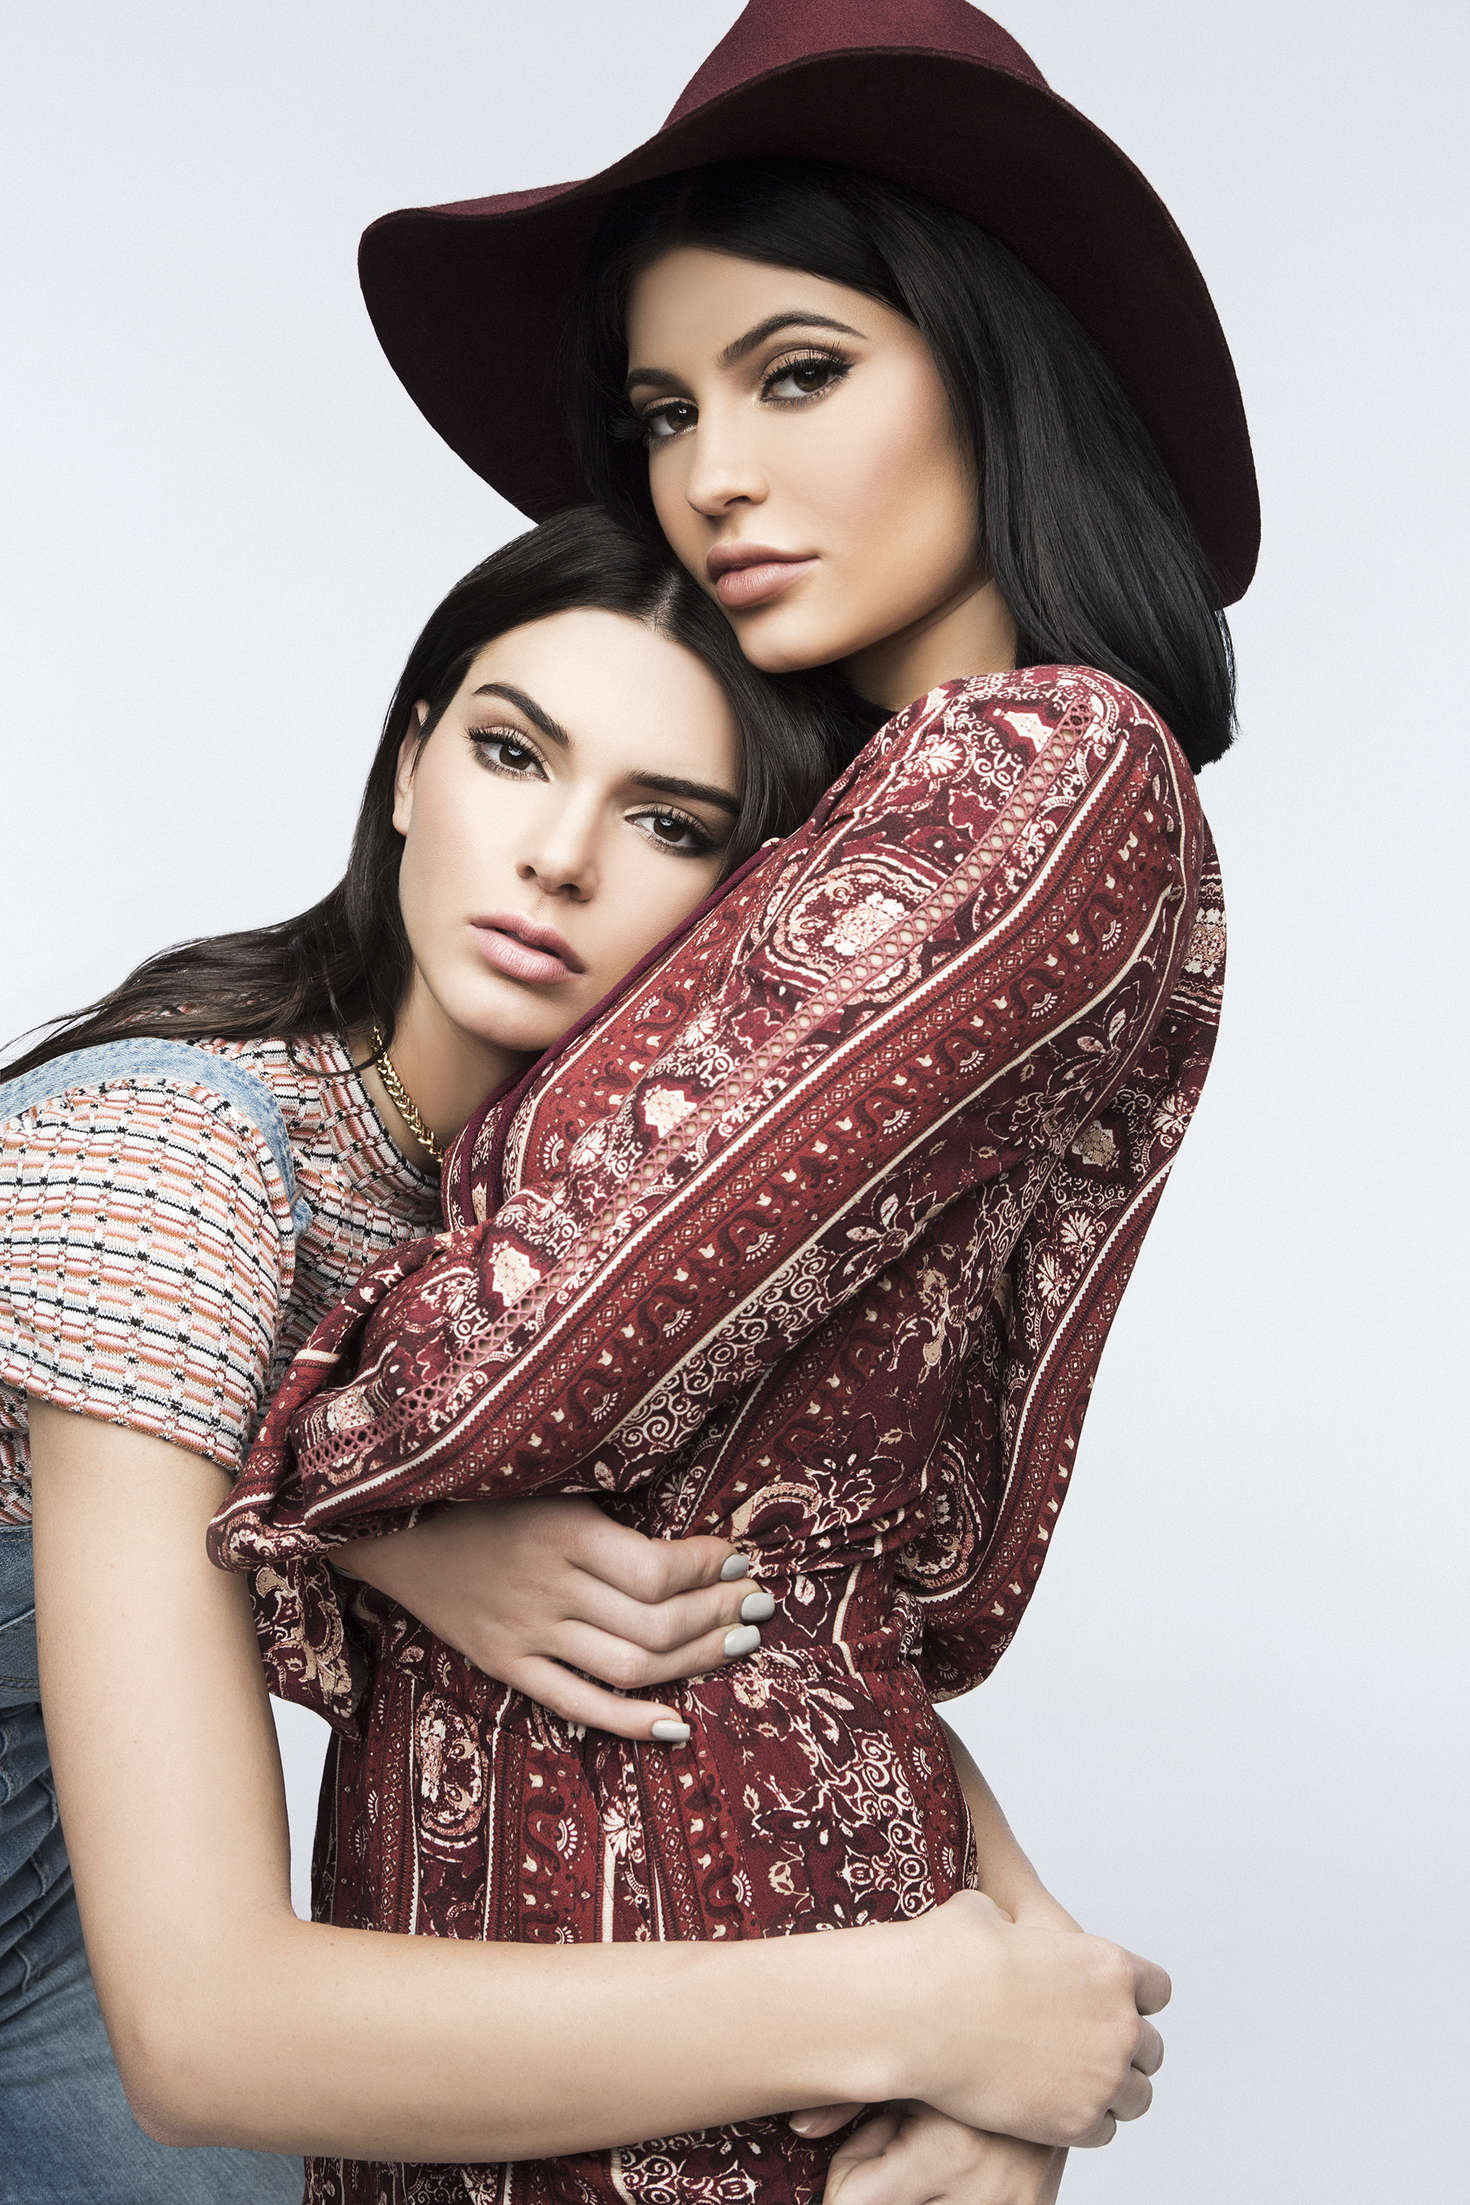 kendall_kylie_jenner_pacsun_spring_2016_collection2.jpg